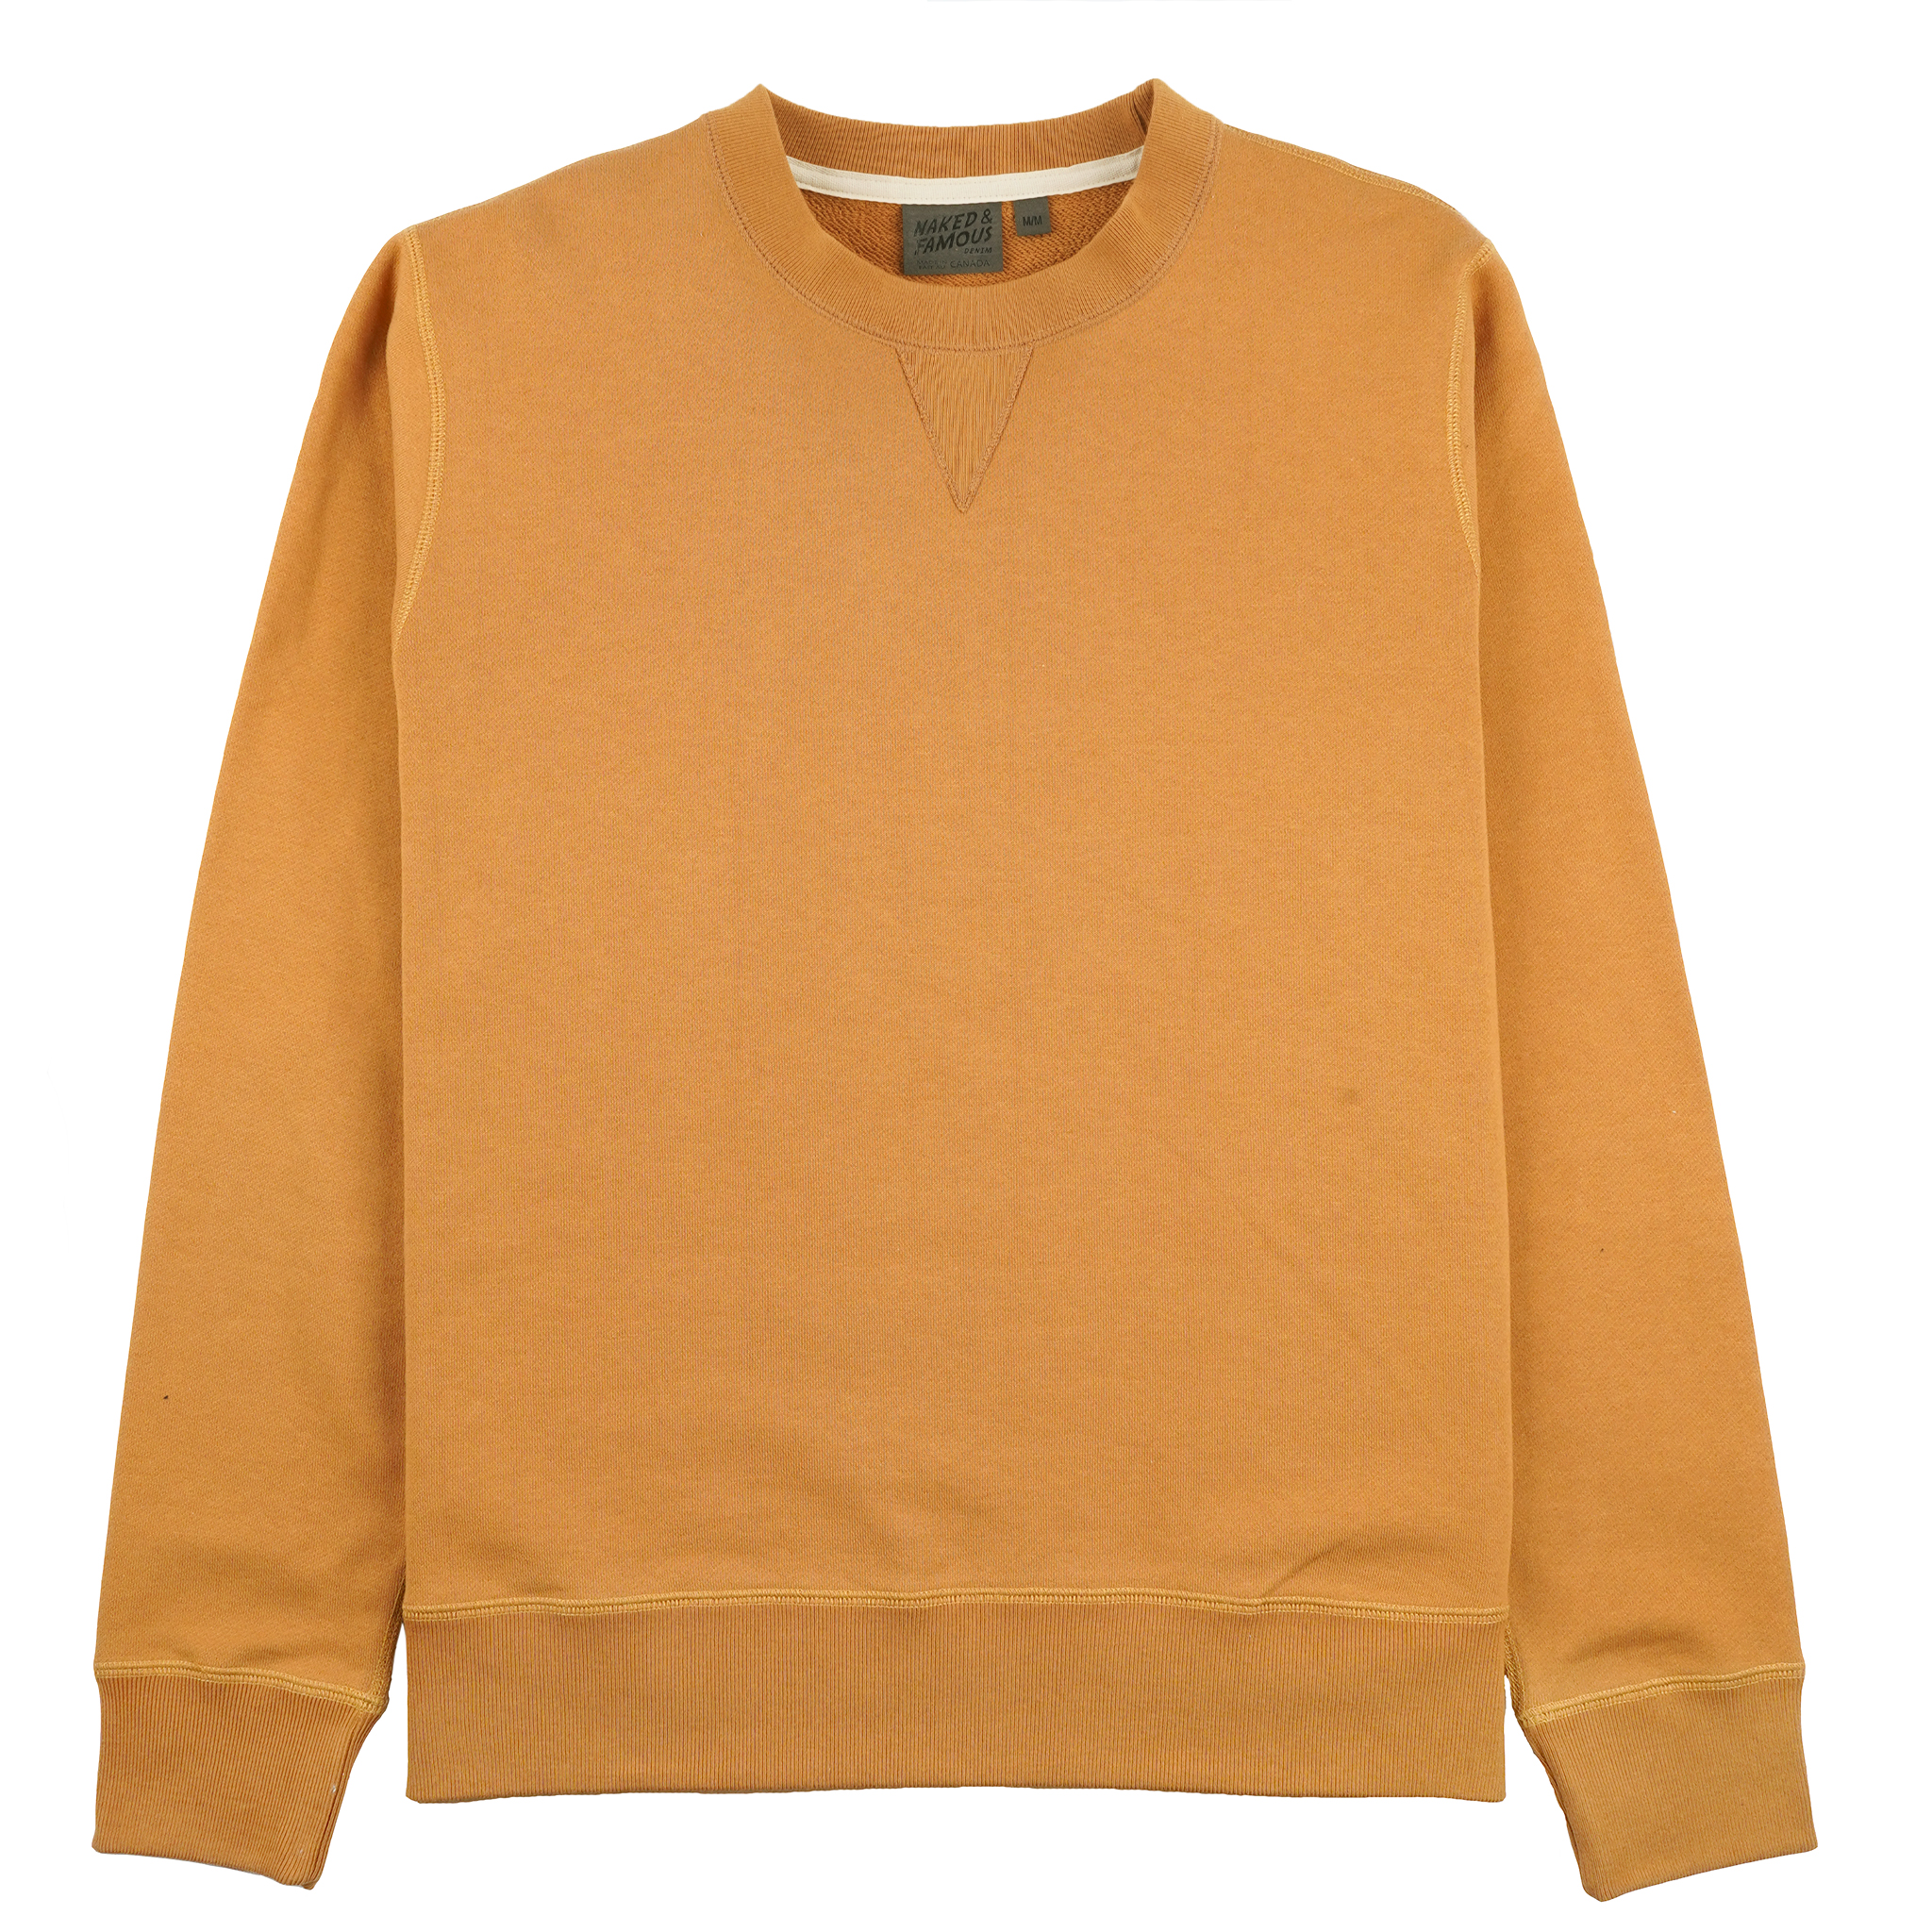  Crewneck Heavyweight Terry Amber - front 